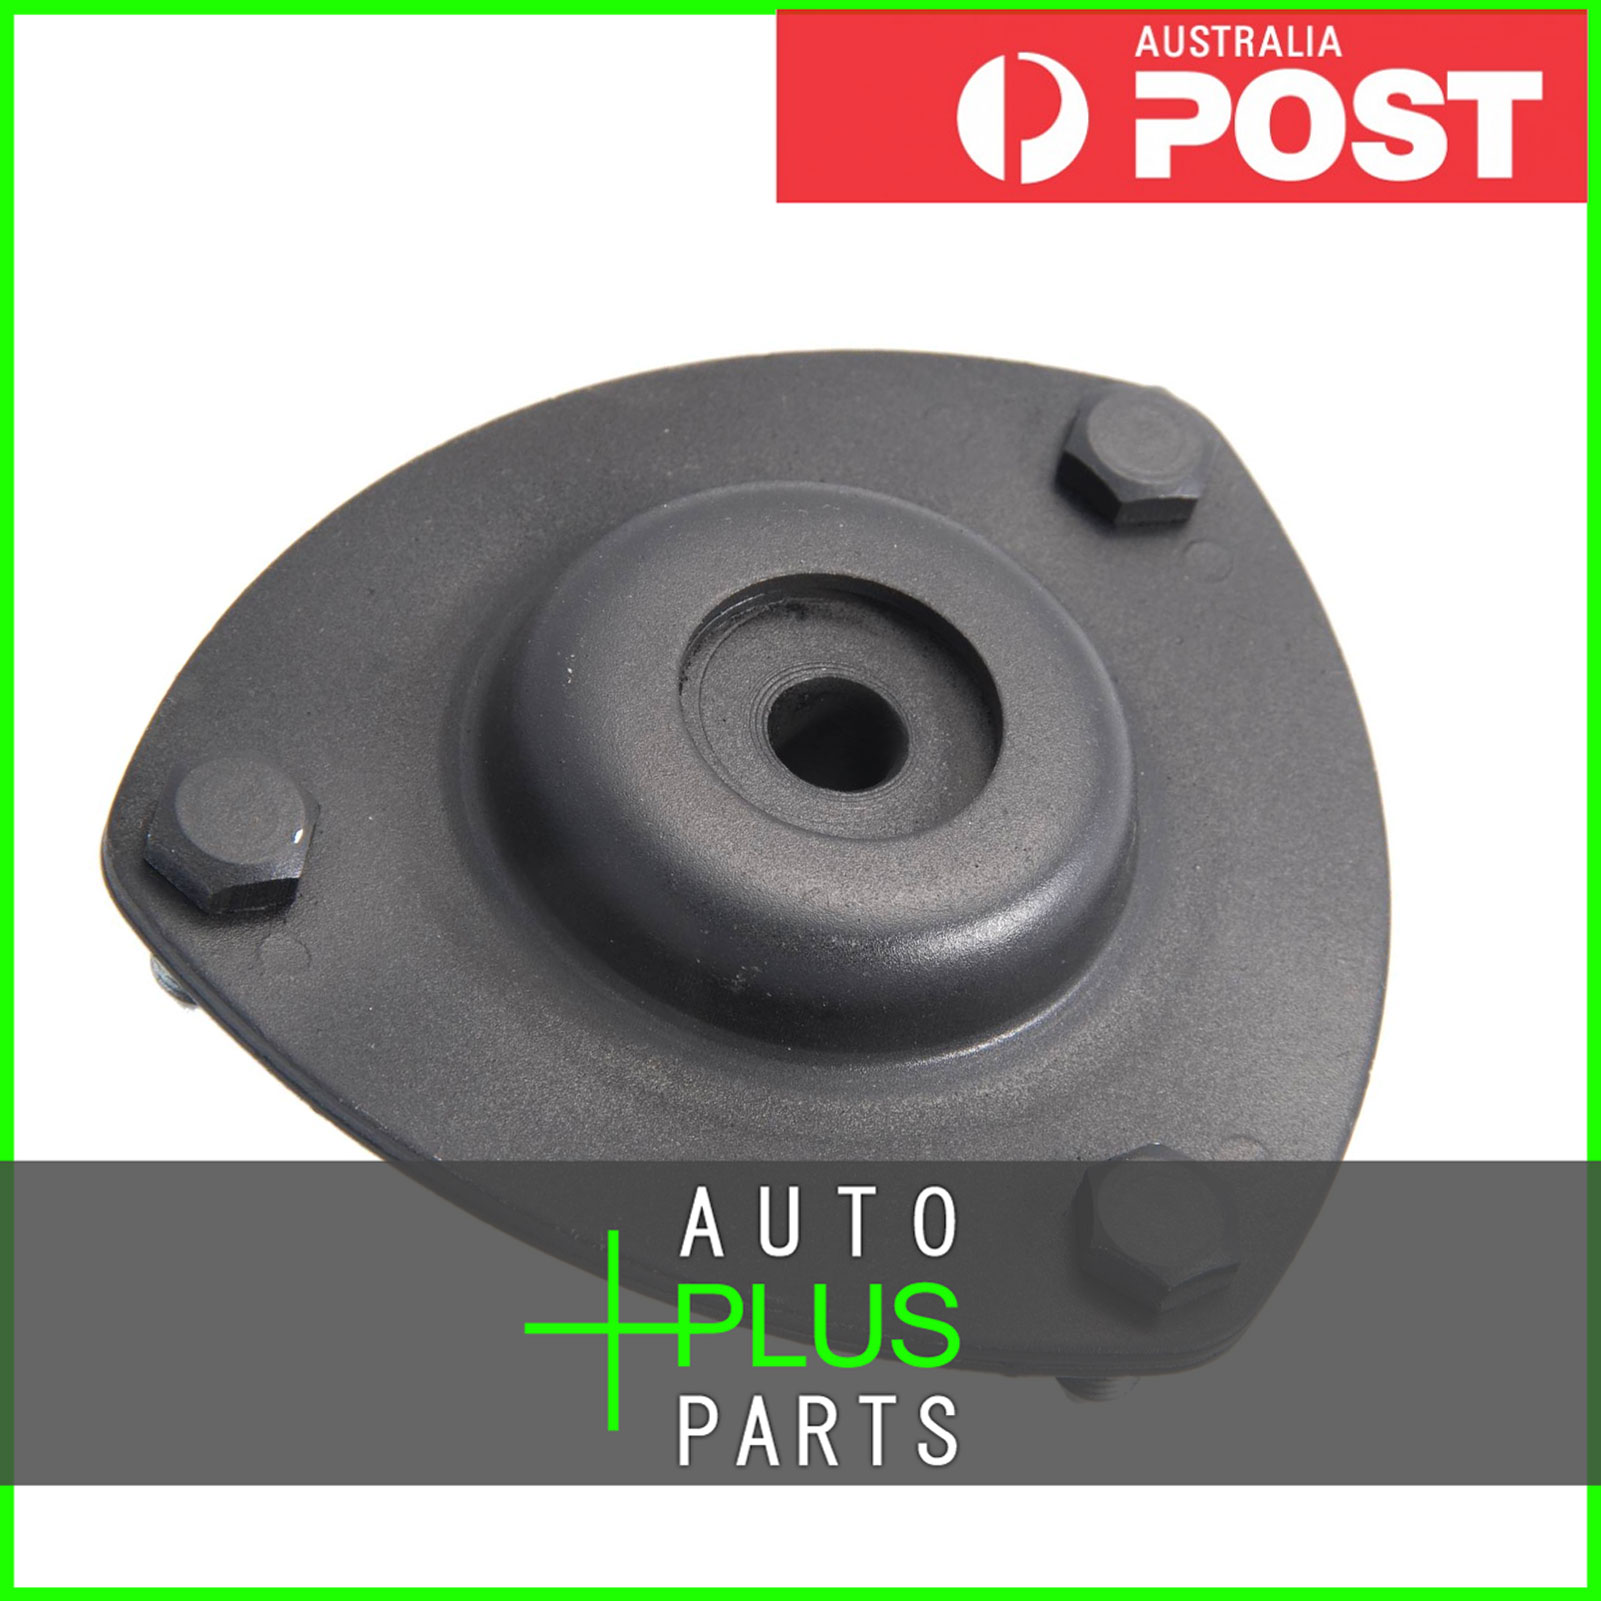 Fits HONDA CIVIC TYPE R EU Left Hand Lh Front Shock Absorber Strut Support Product Photo